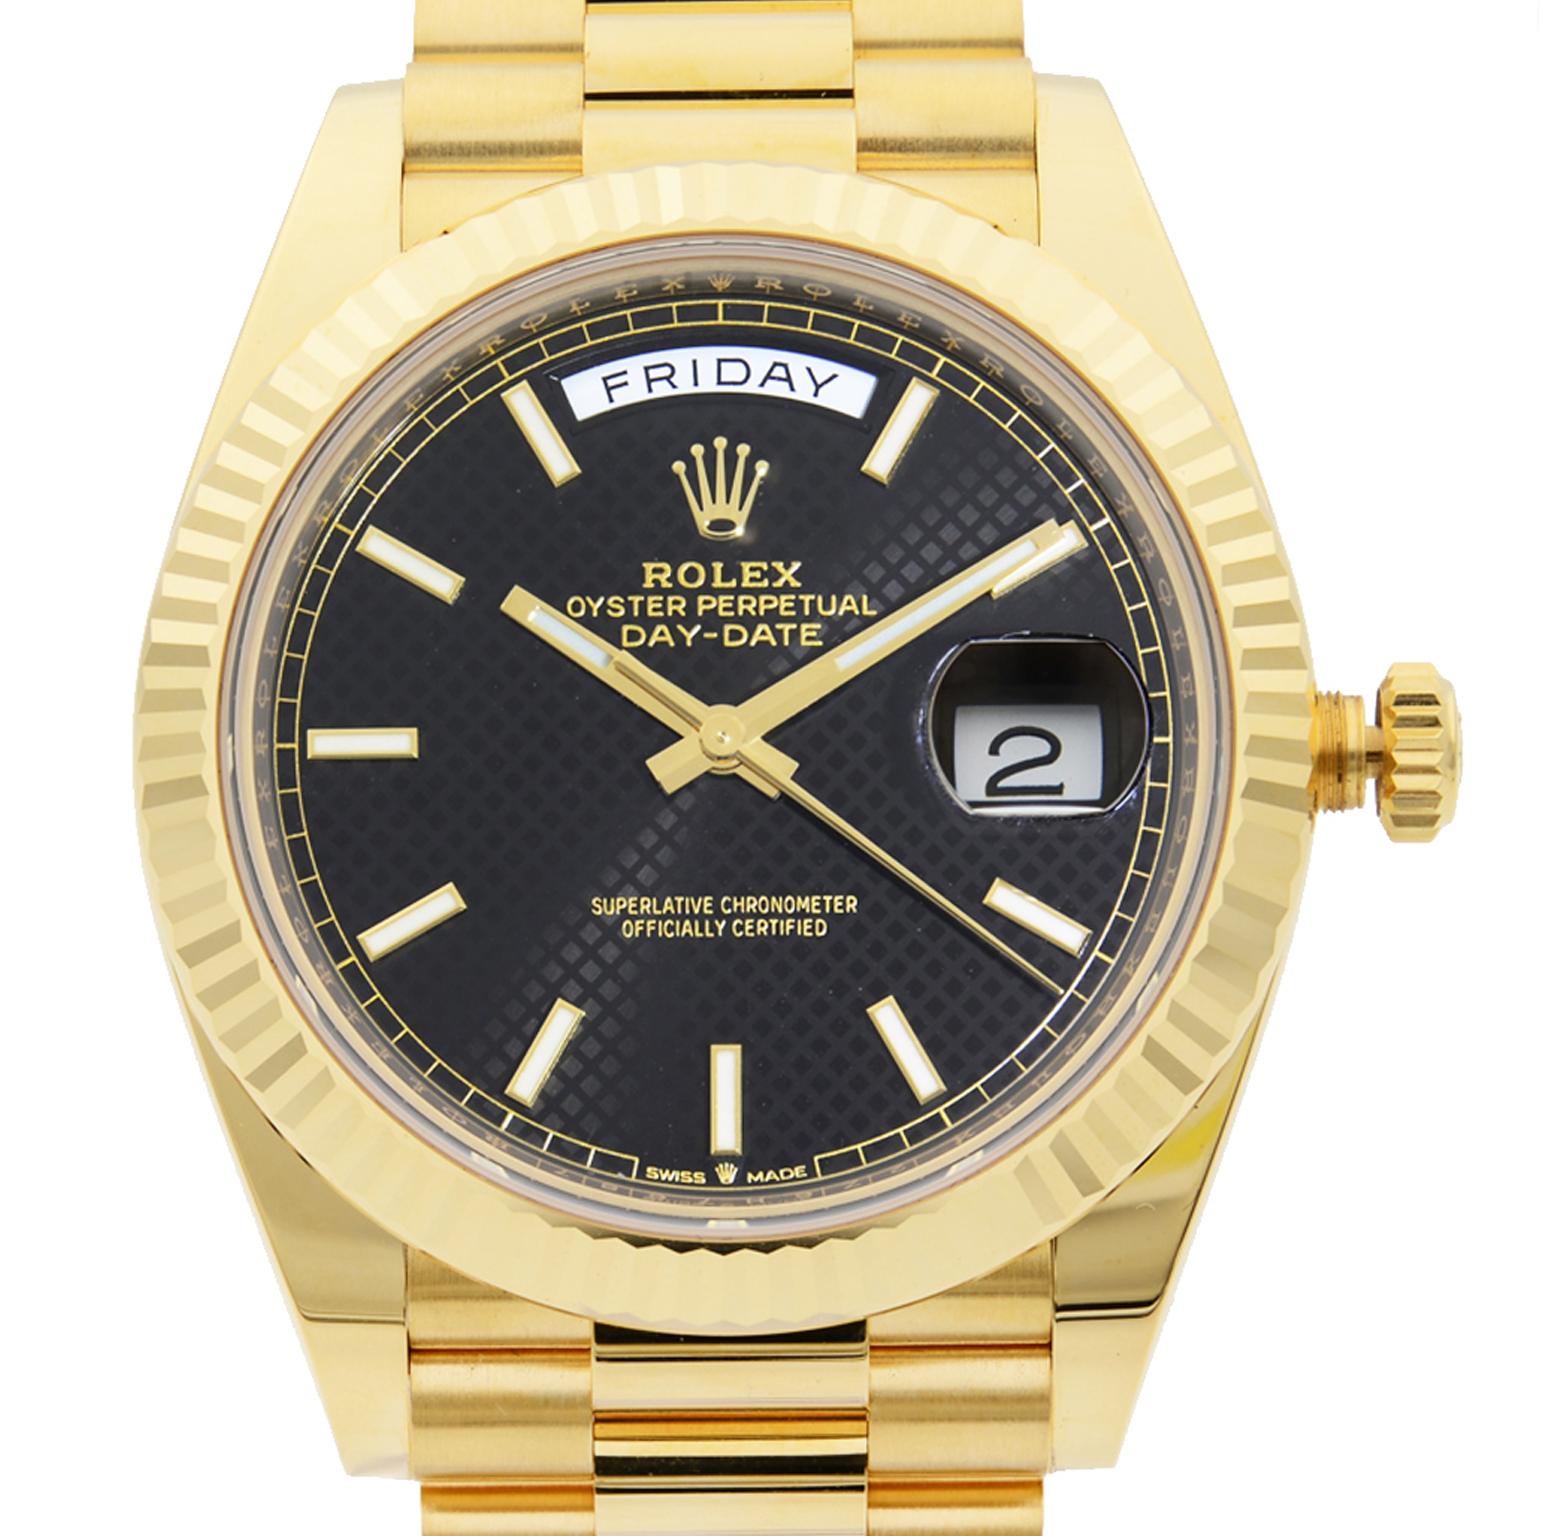 This  never been worn  Rolex Day-Date 228238 is a beautiful men's timepiece that is powered by mechanical (automatic) movement which is cased in a yellow gold case. It has a round shape face, day & date dial and has hand sticks style markers. It is